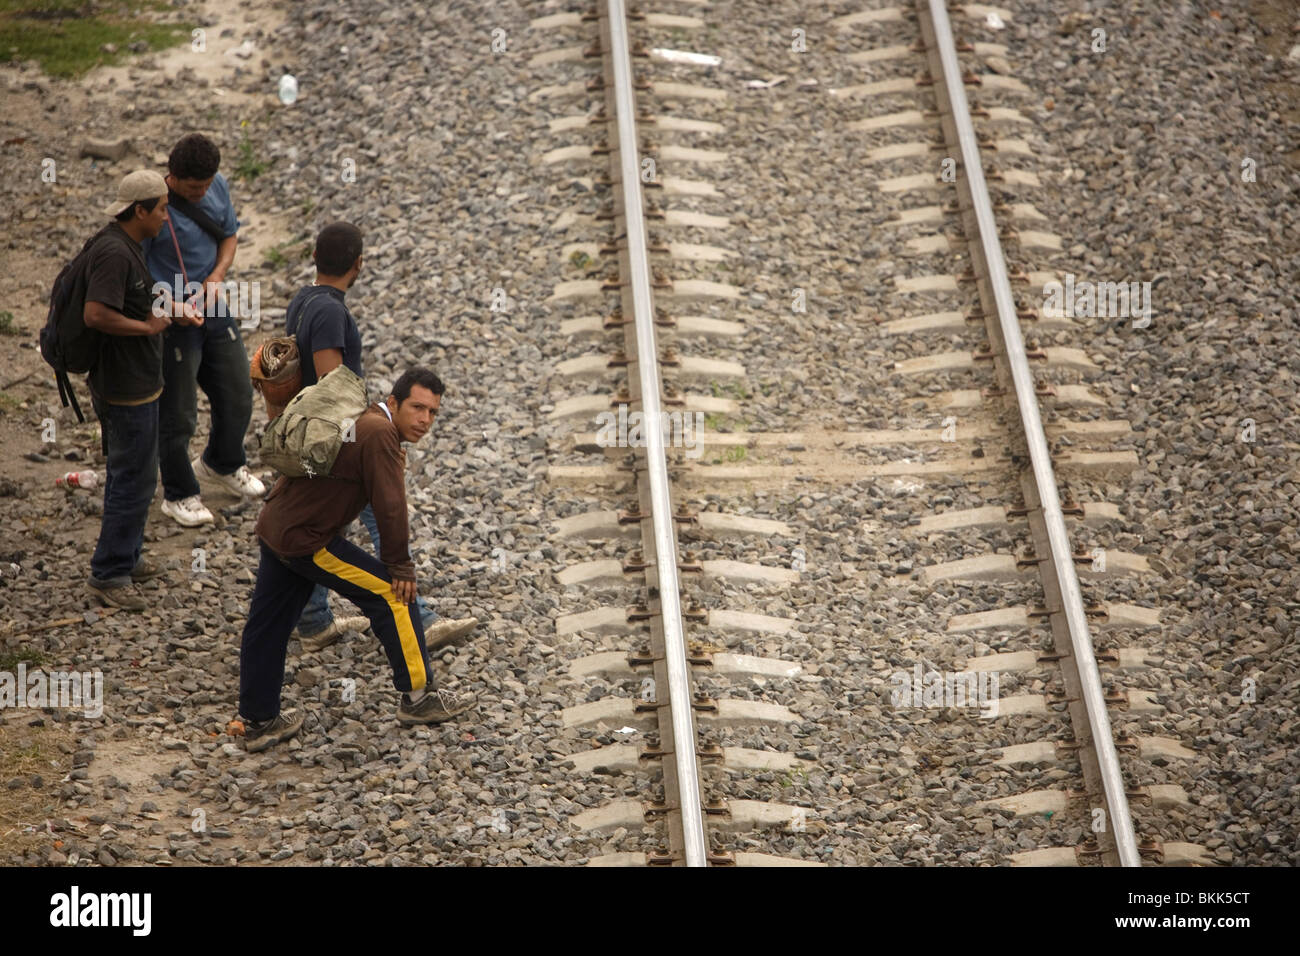 Undocumented Central American migrants traveling  to work in the United States wait along the railroad tracks in Mexico City. Stock Photo